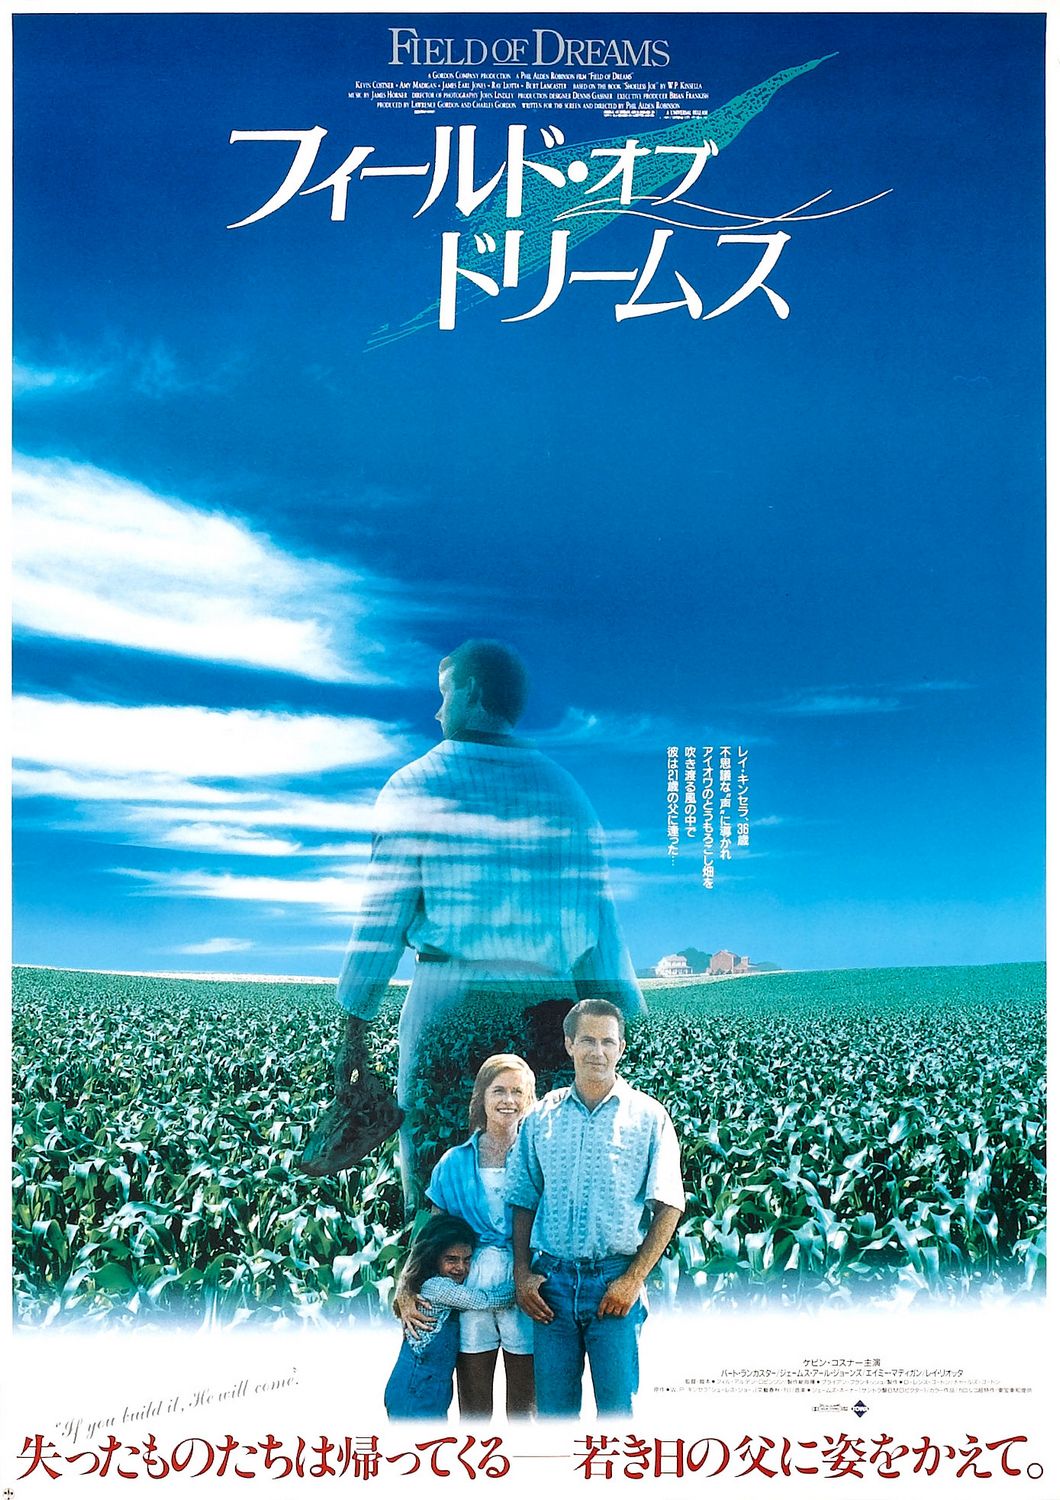 Extra Large Movie Poster Image for Field of Dreams (#2 of 2)